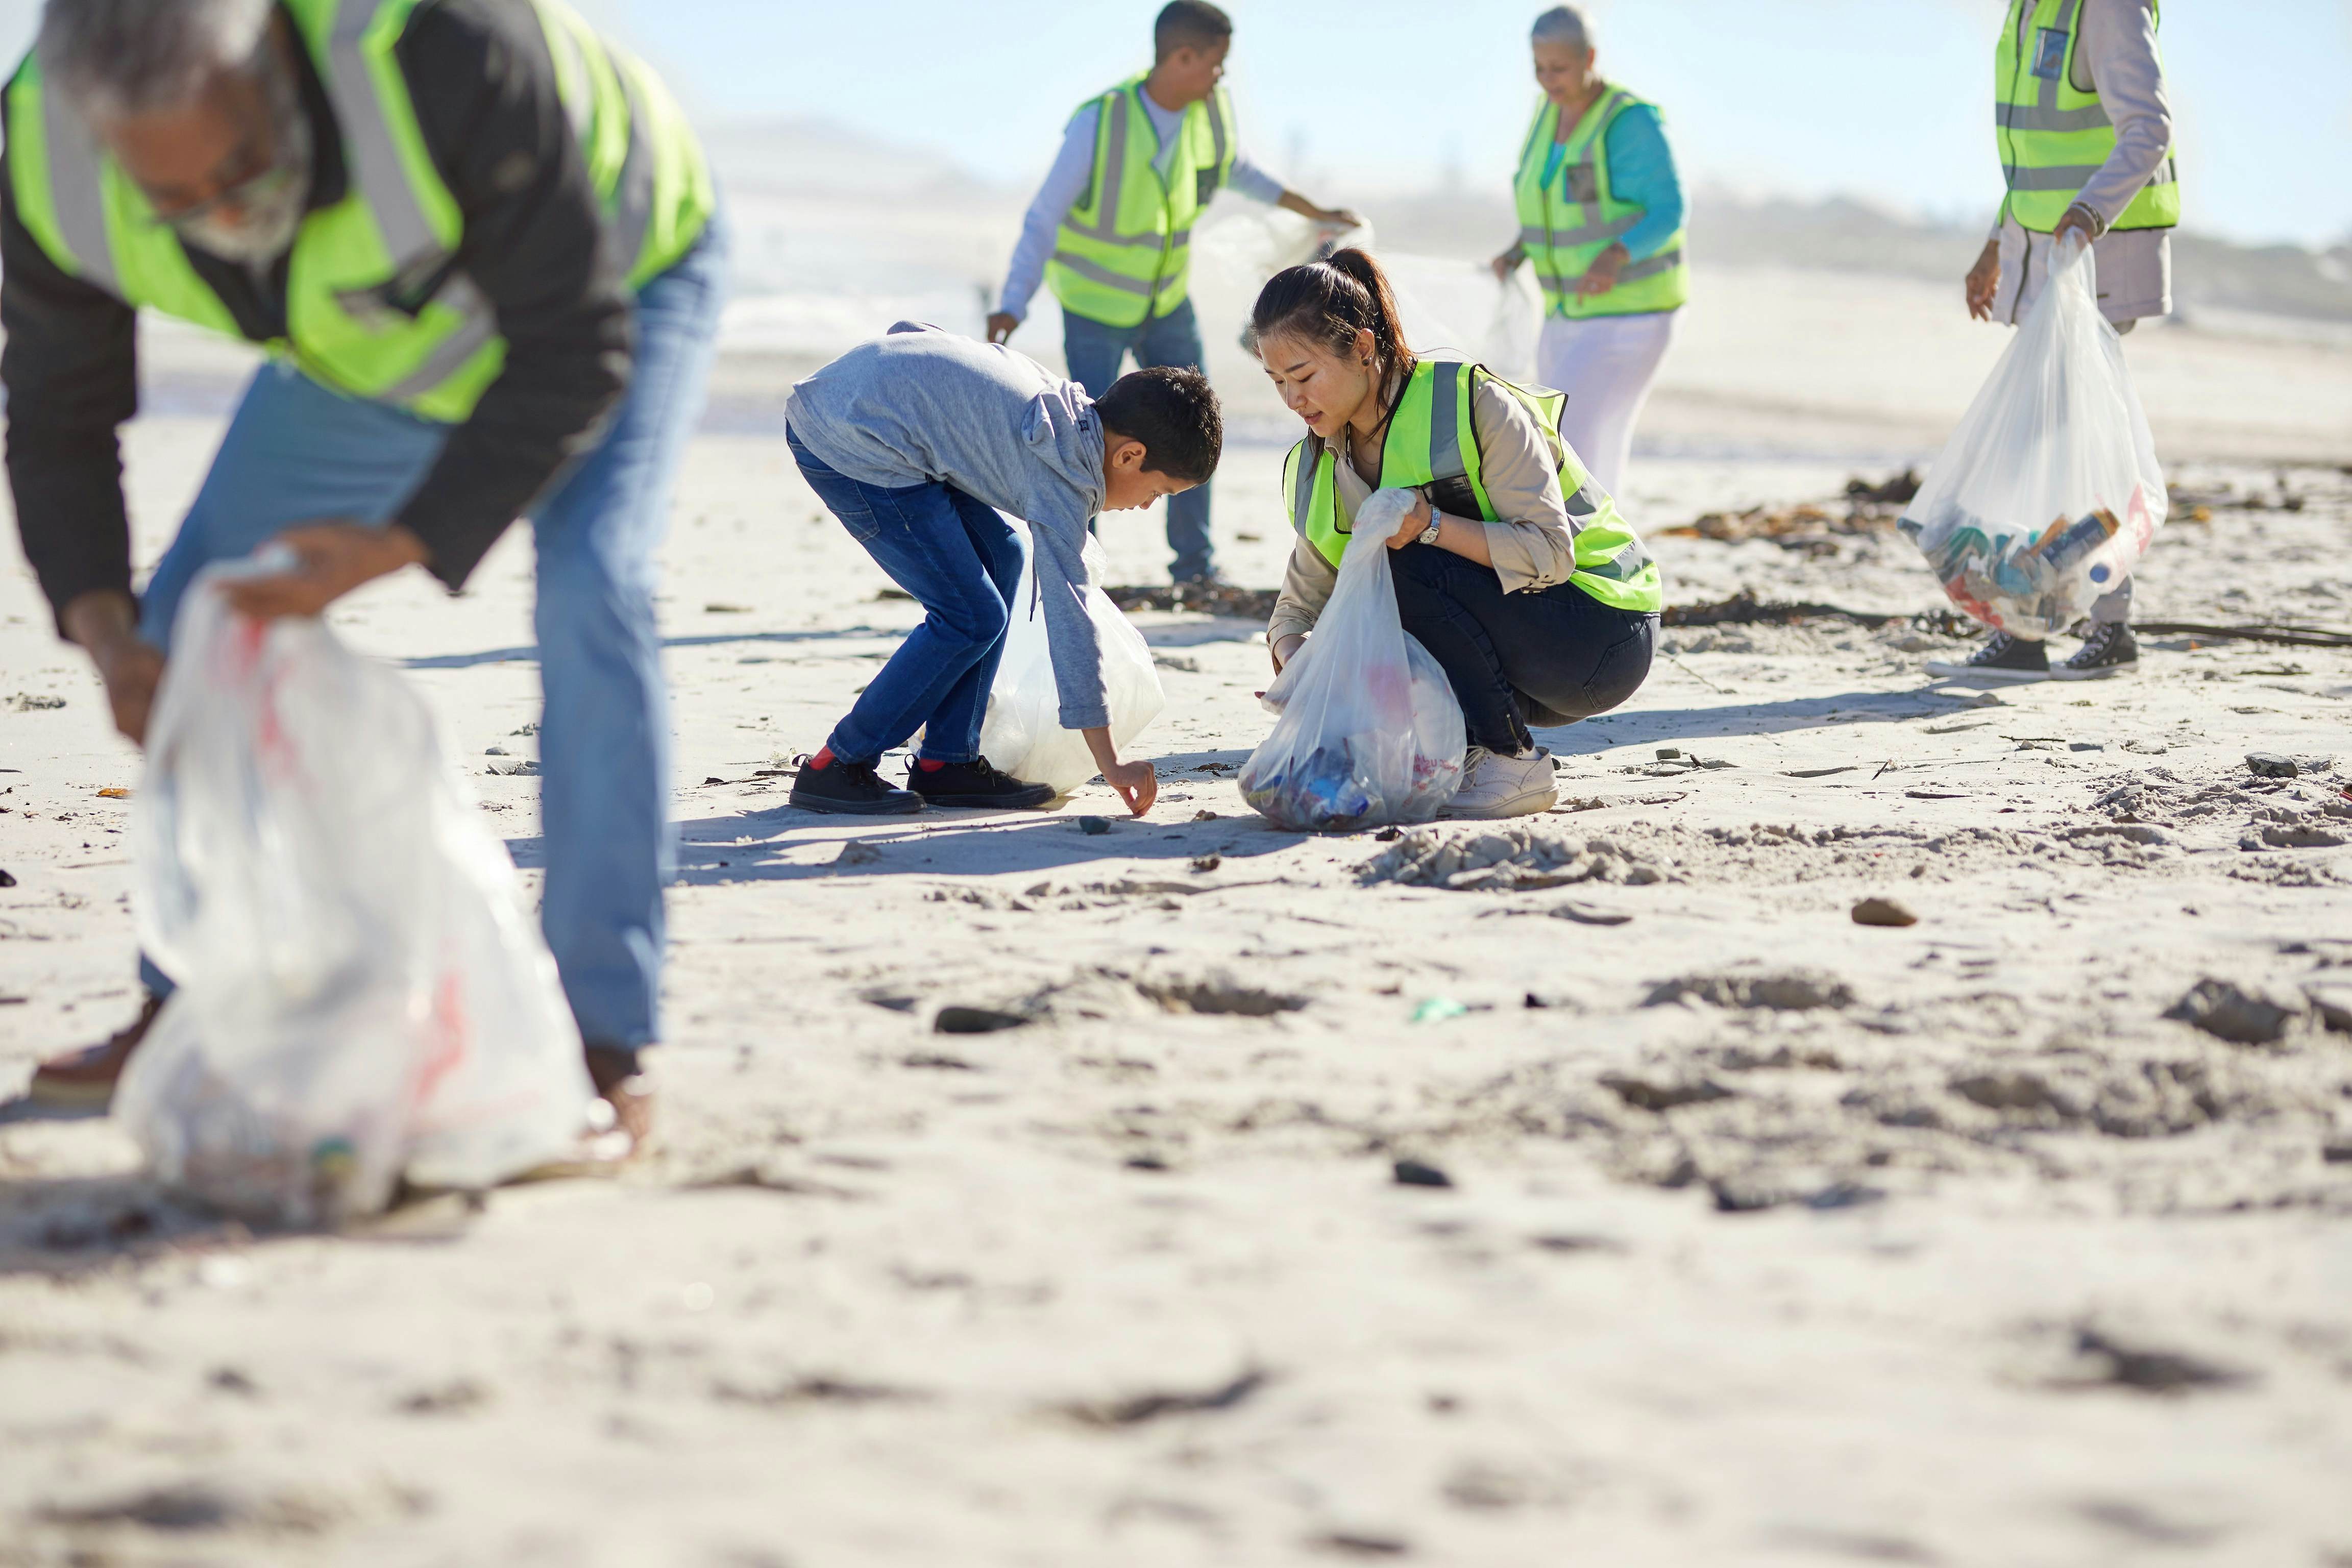 Beach Clean Up - September 22, 2019 | Rotary Club of St. Croix